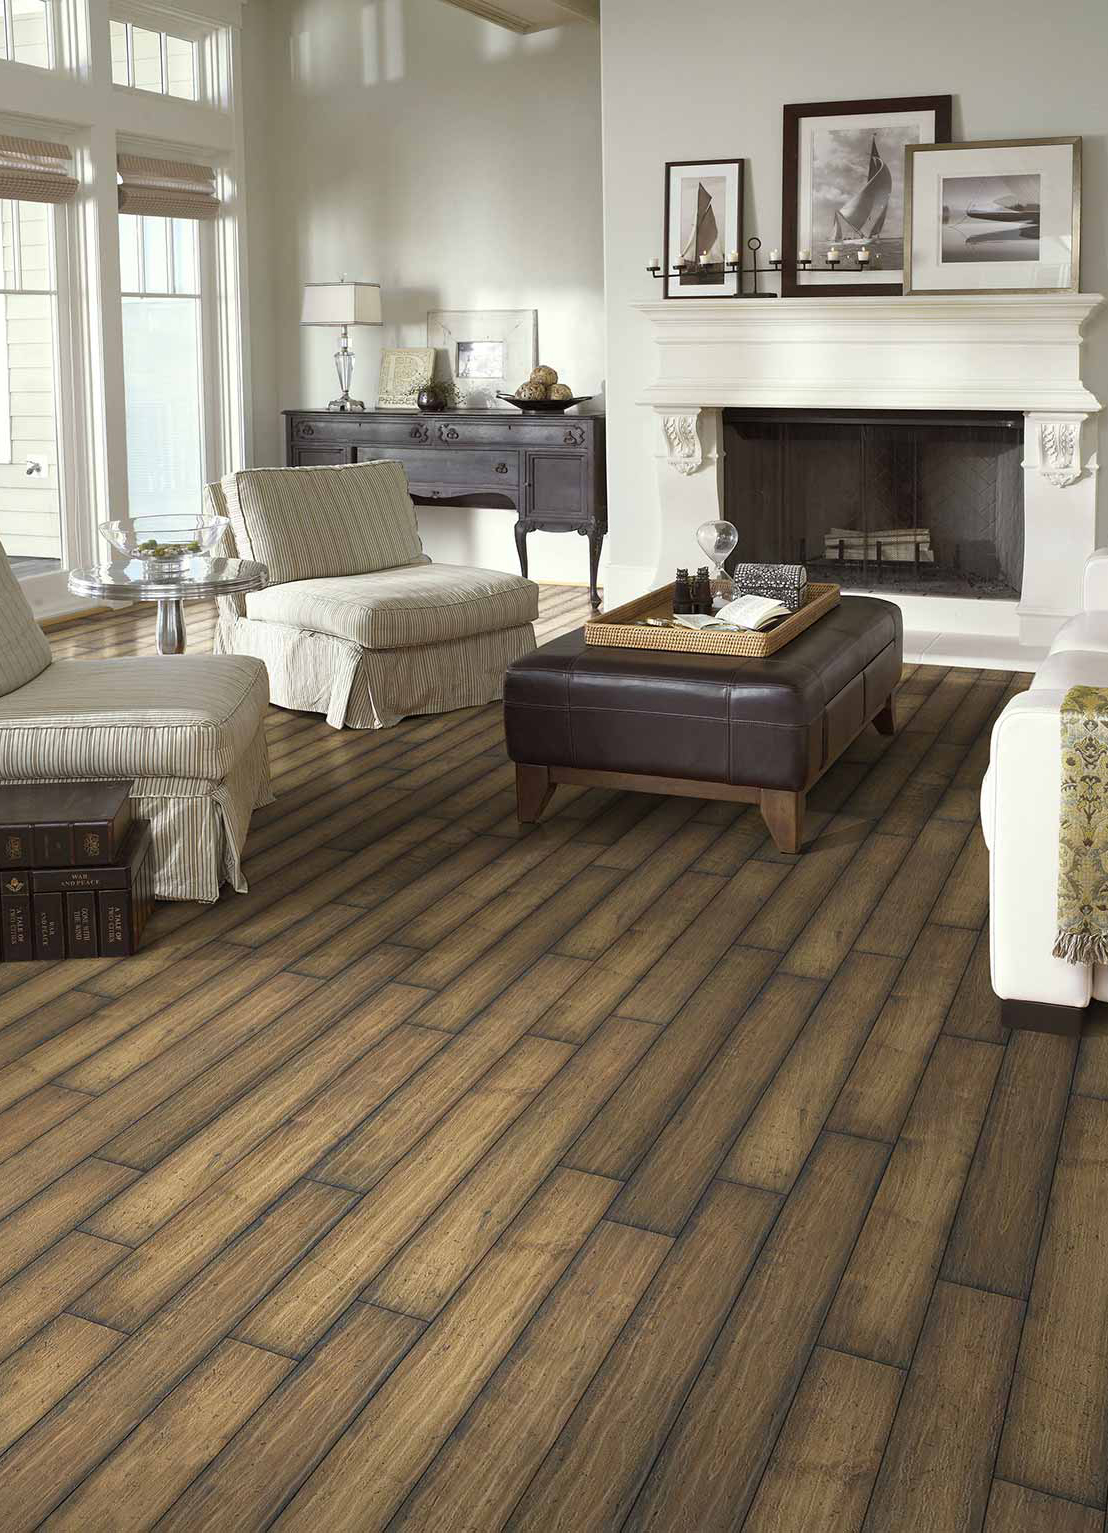 Wood-look laminate by Shaw Floors in living room setting.